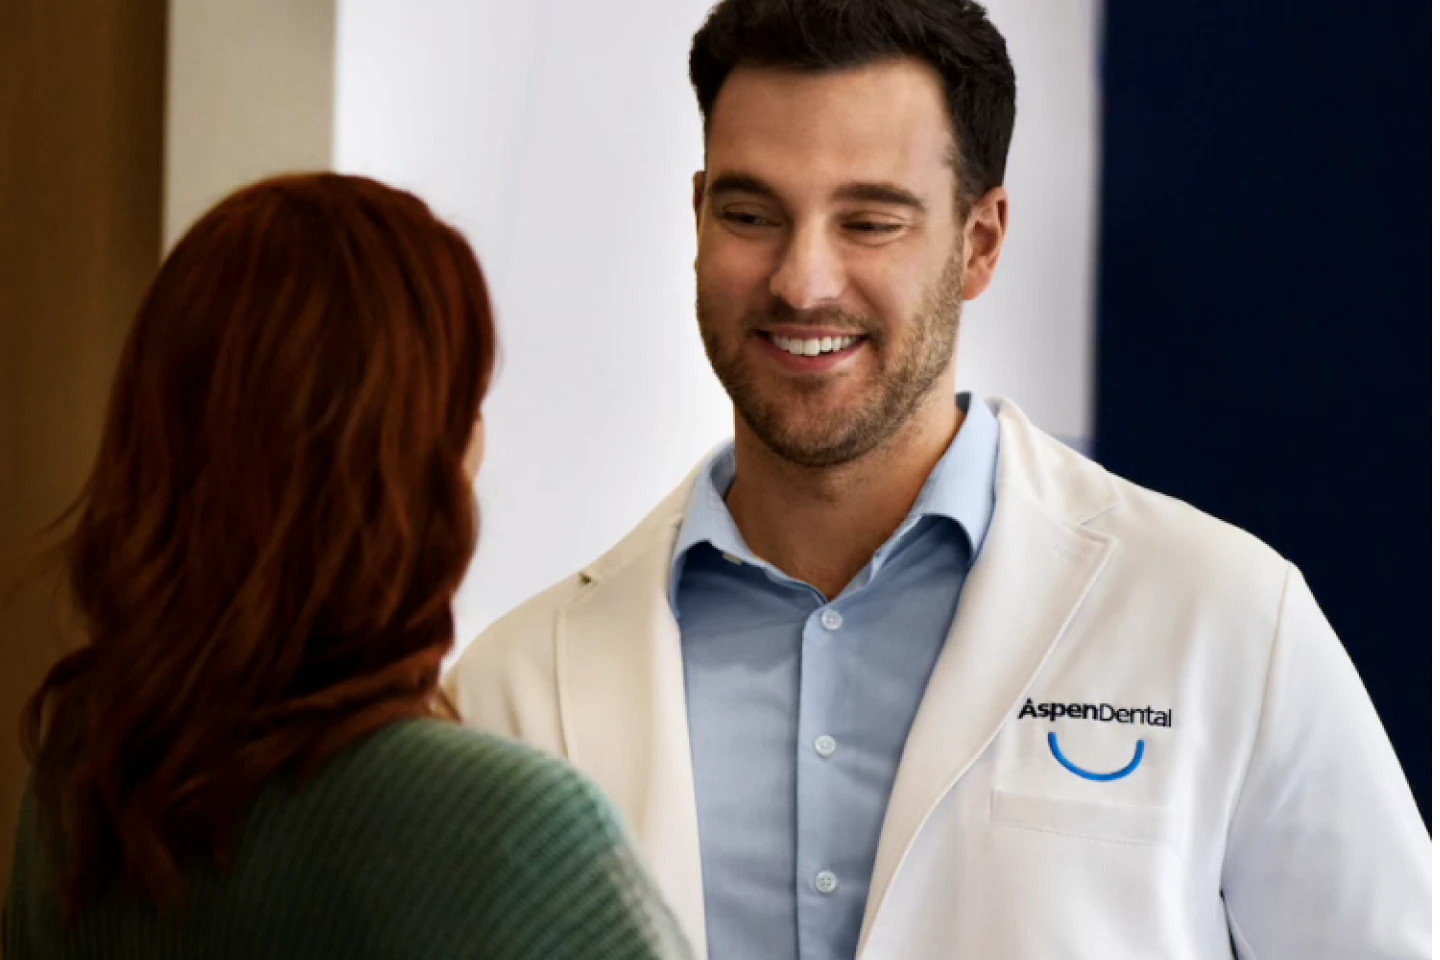 An Aspen Dental dentist in a white coat is conversing with a patient about her oral health.